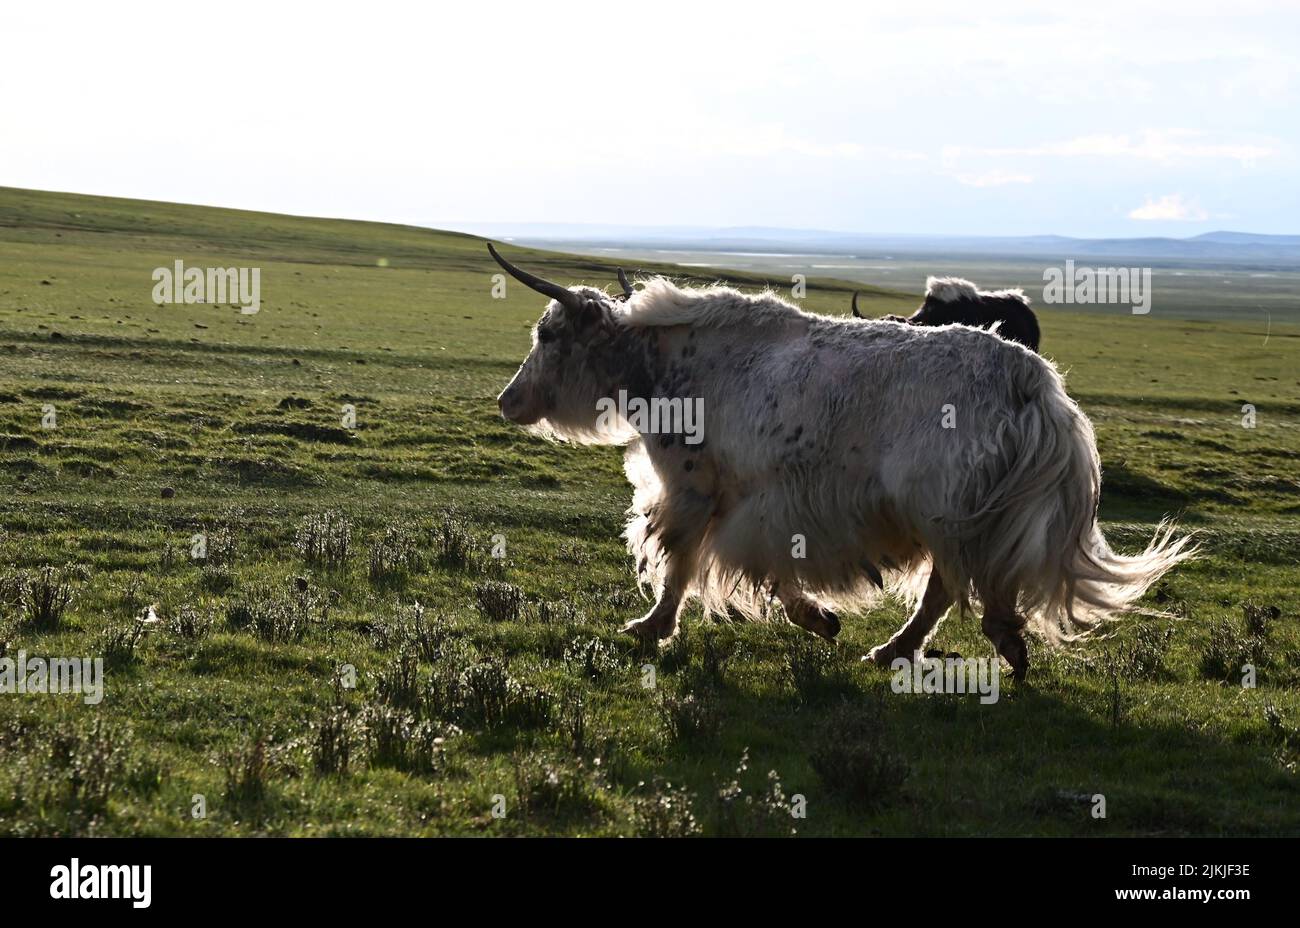 A beautiful shot of a white yak walking on the grassland on a sunny day with a cloudy sky Stock Photo